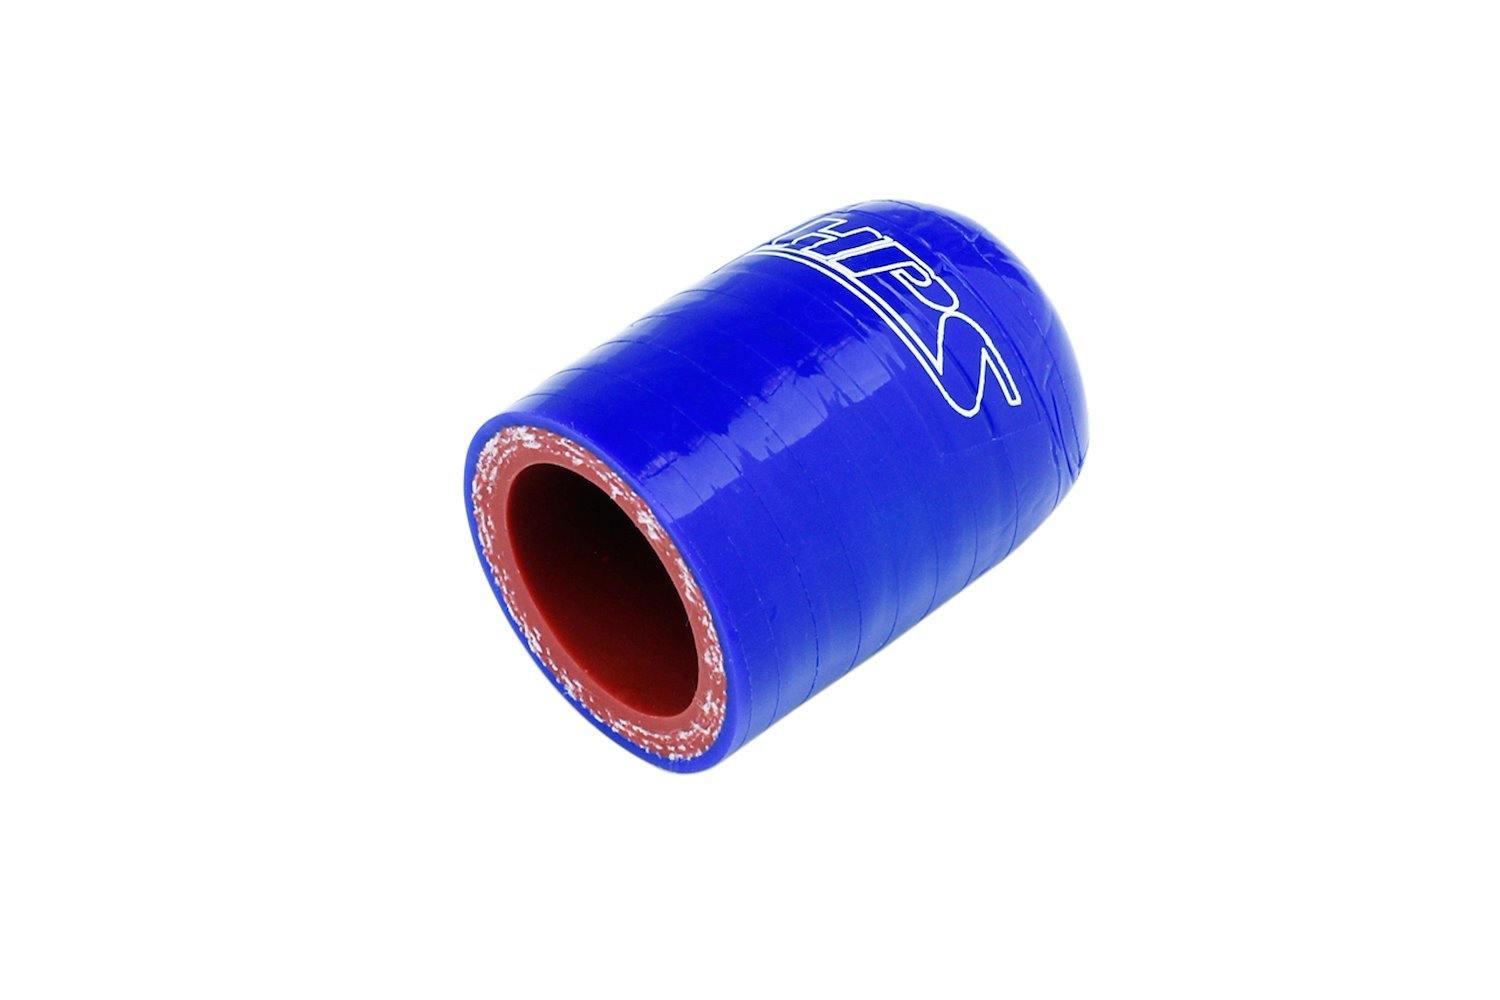 RSCC-025-BLUE Coolant Bypass Cap, 3-Ply Reinforced High-Temp. Silicone Bypass Cap, 1/4 in. ID, Blue